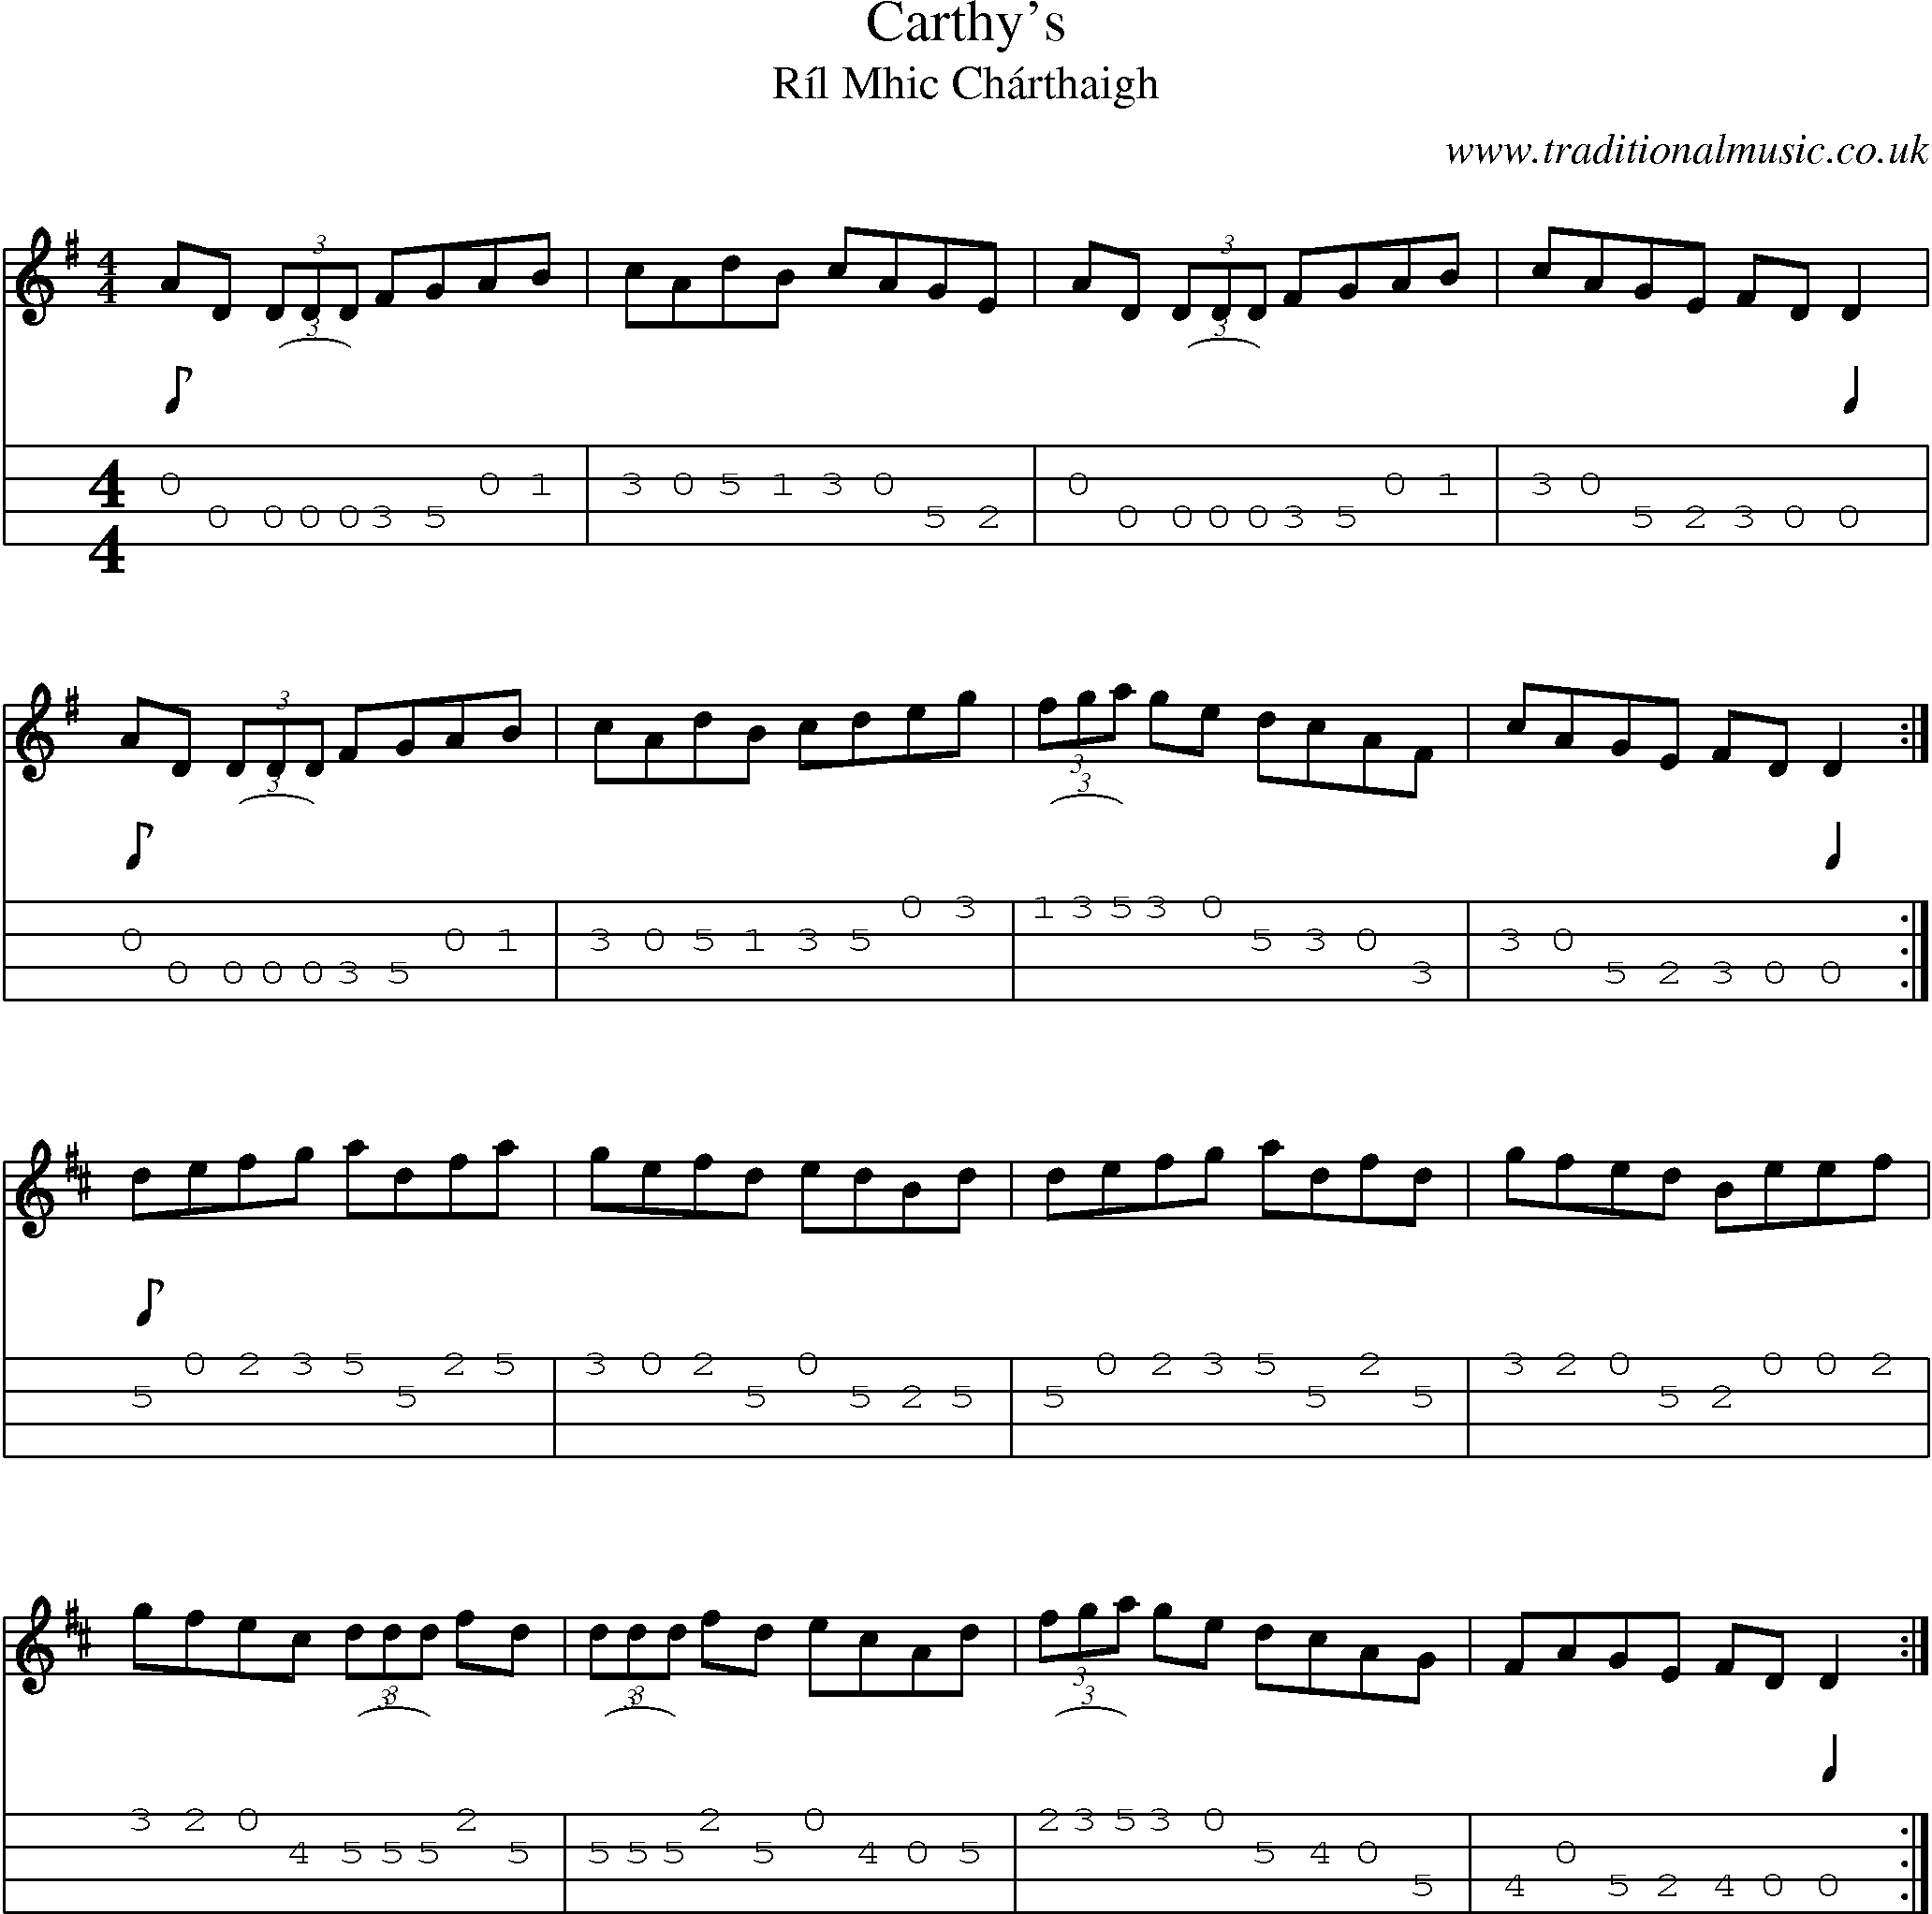 Music Score and Mandolin Tabs for Carthys